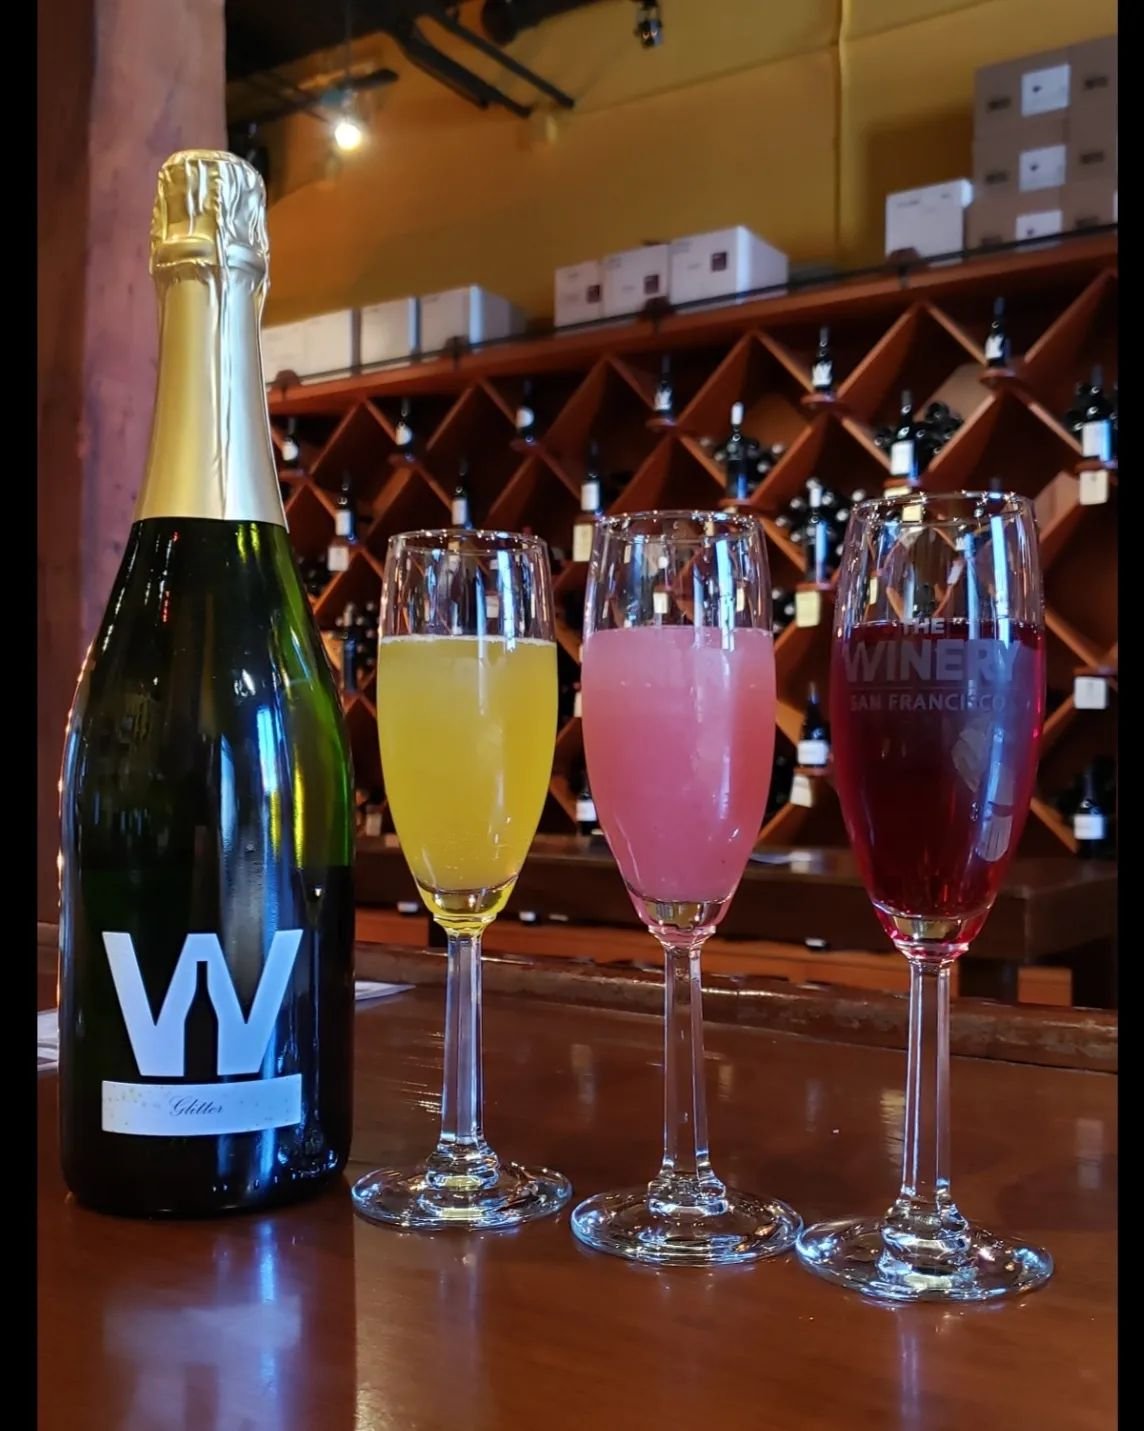 💥Mimosas All Day! Join us on Cinco De Mayo for a fun time and delicious Mimosas made from our Glitter Sparkling wine! Cheers🥂❤

#winerycollectivesf #mimosas #cincodemayo #sanfrancisco #bayarea #california #mimosasallday #cheers